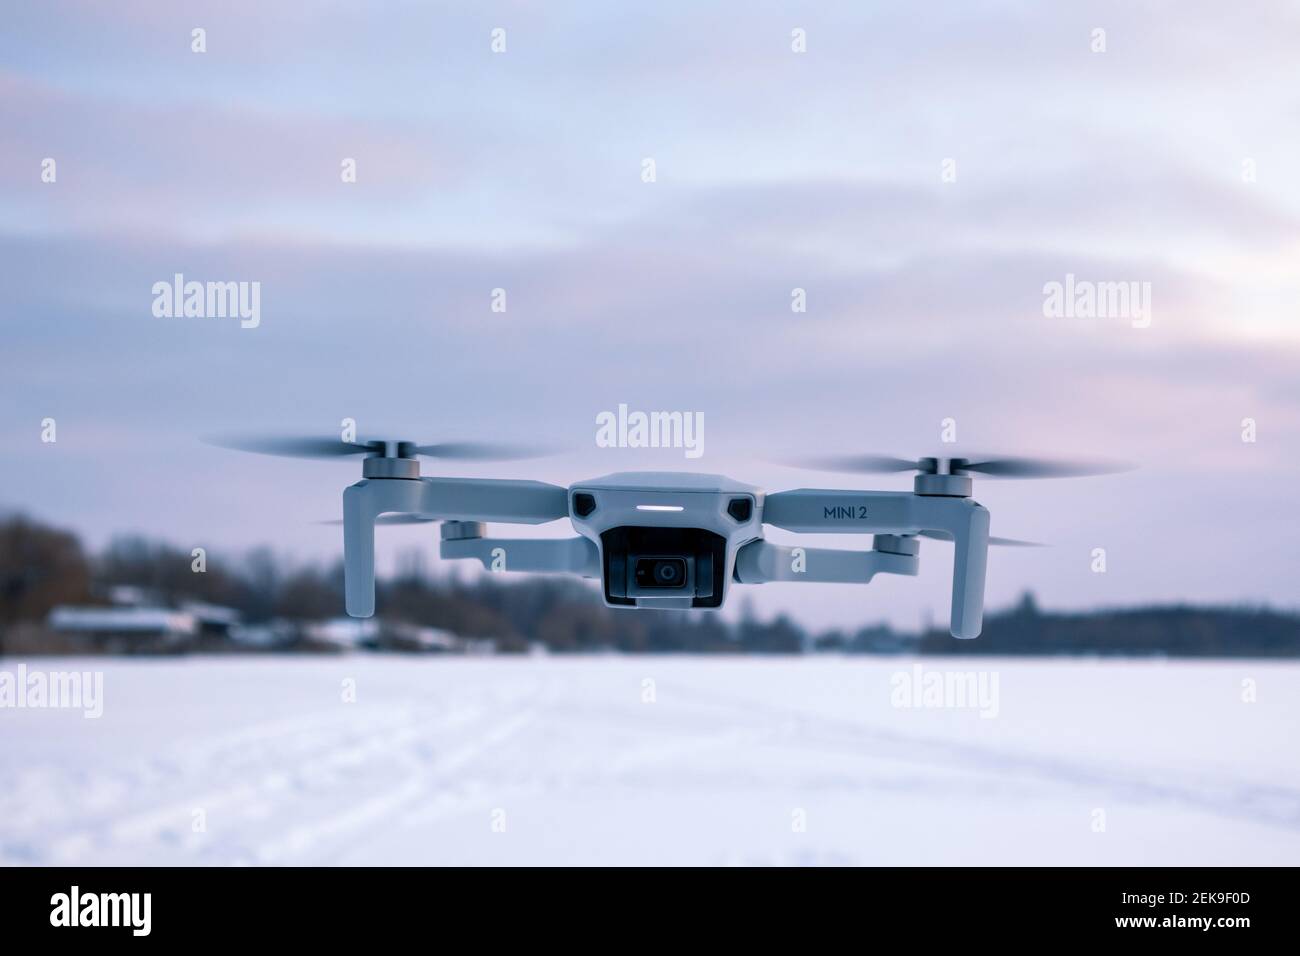 Kharkiv, Ukraine - February 21, 2021: Dji Mavic Mini 2 drone flying in winter snowy landscape in sunset purple clouds. New quadcopter device hovering Stock Photo